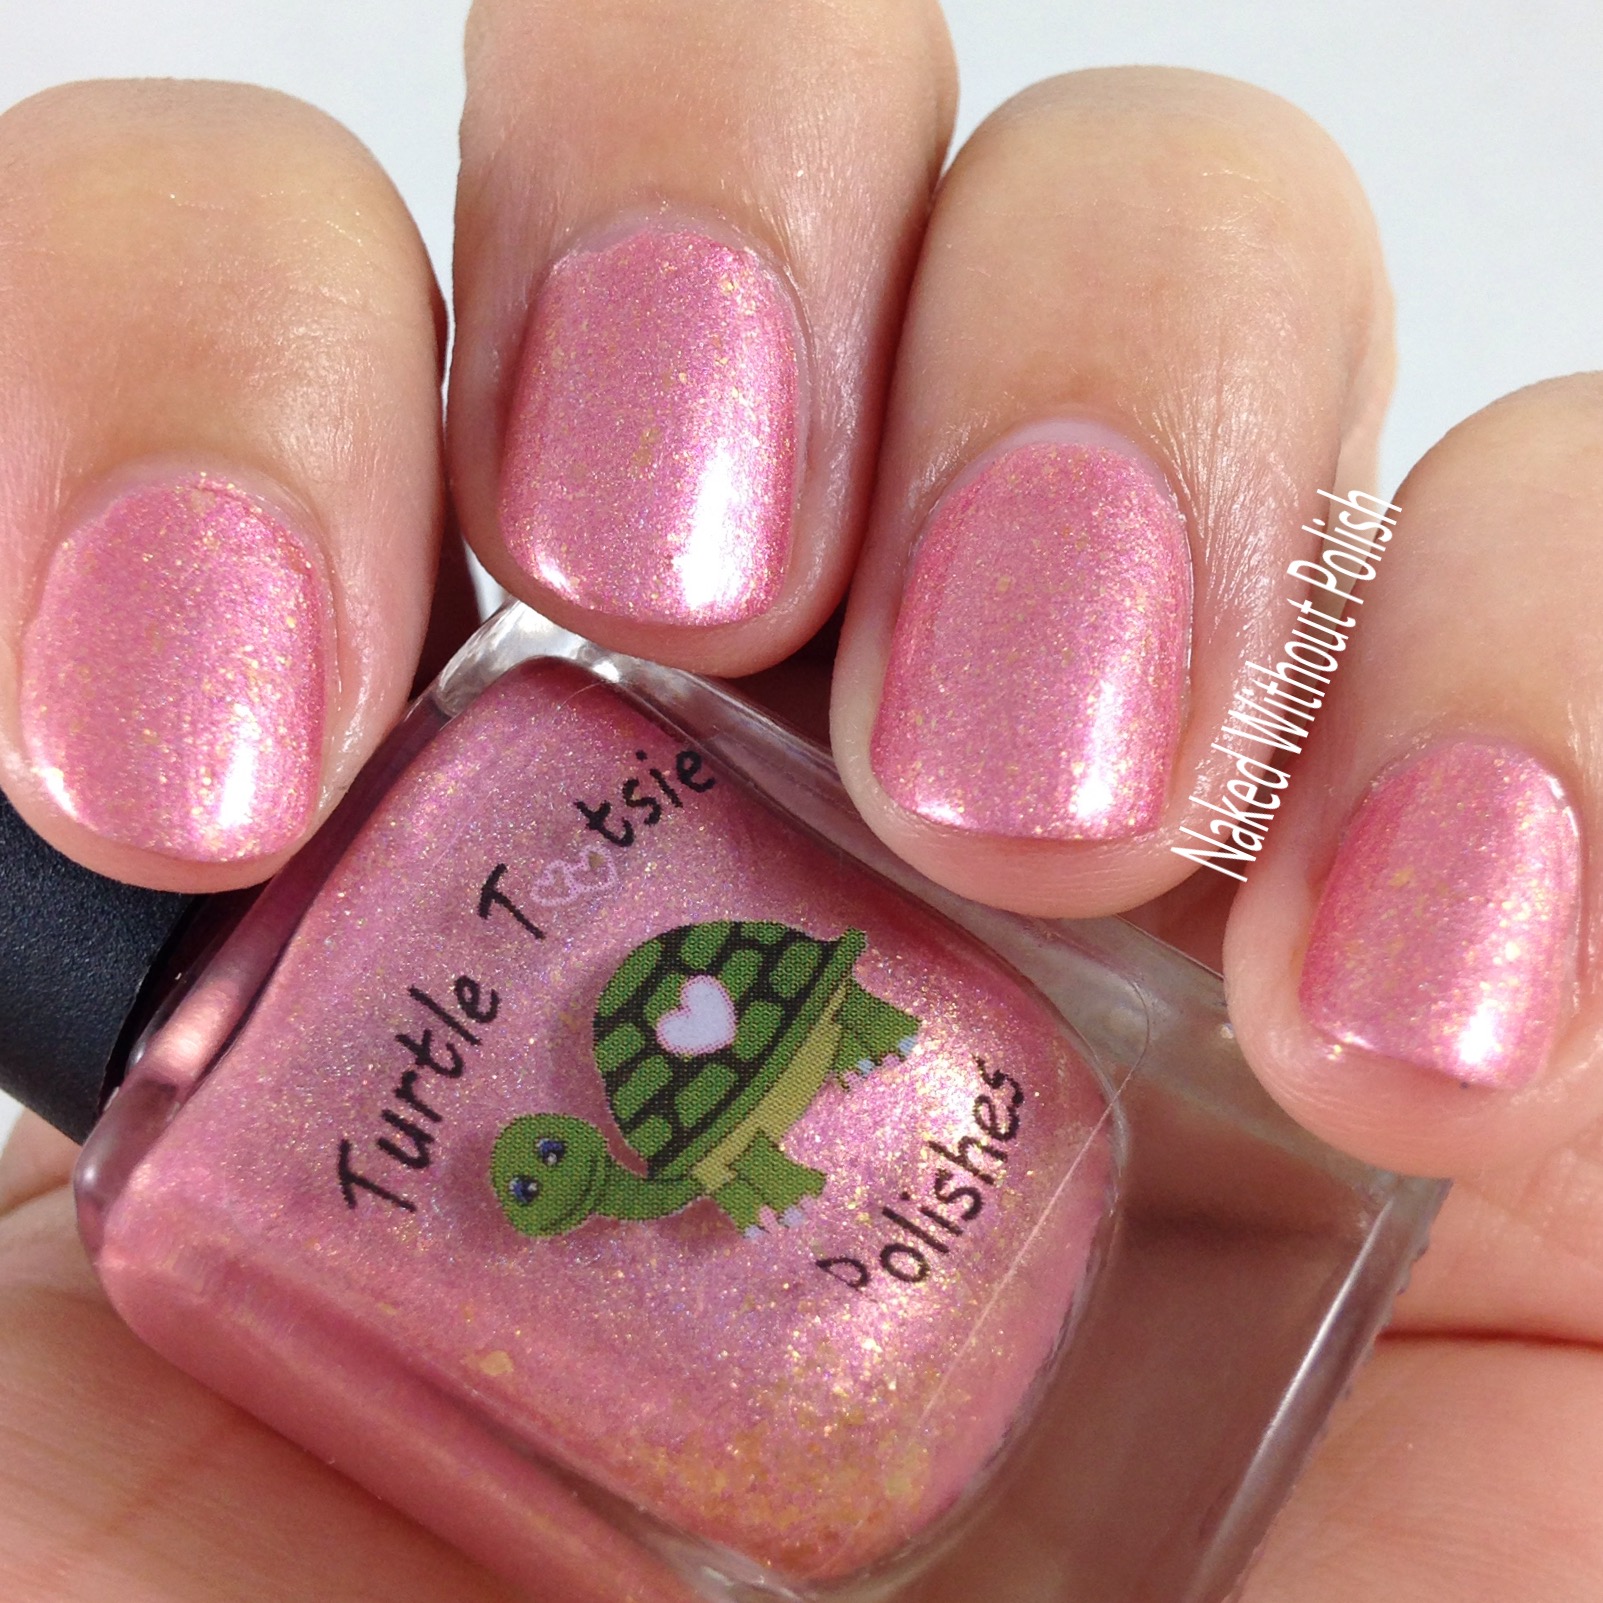 Turtle-Tootsie-Polishes-Beauty-School-Dropout-6